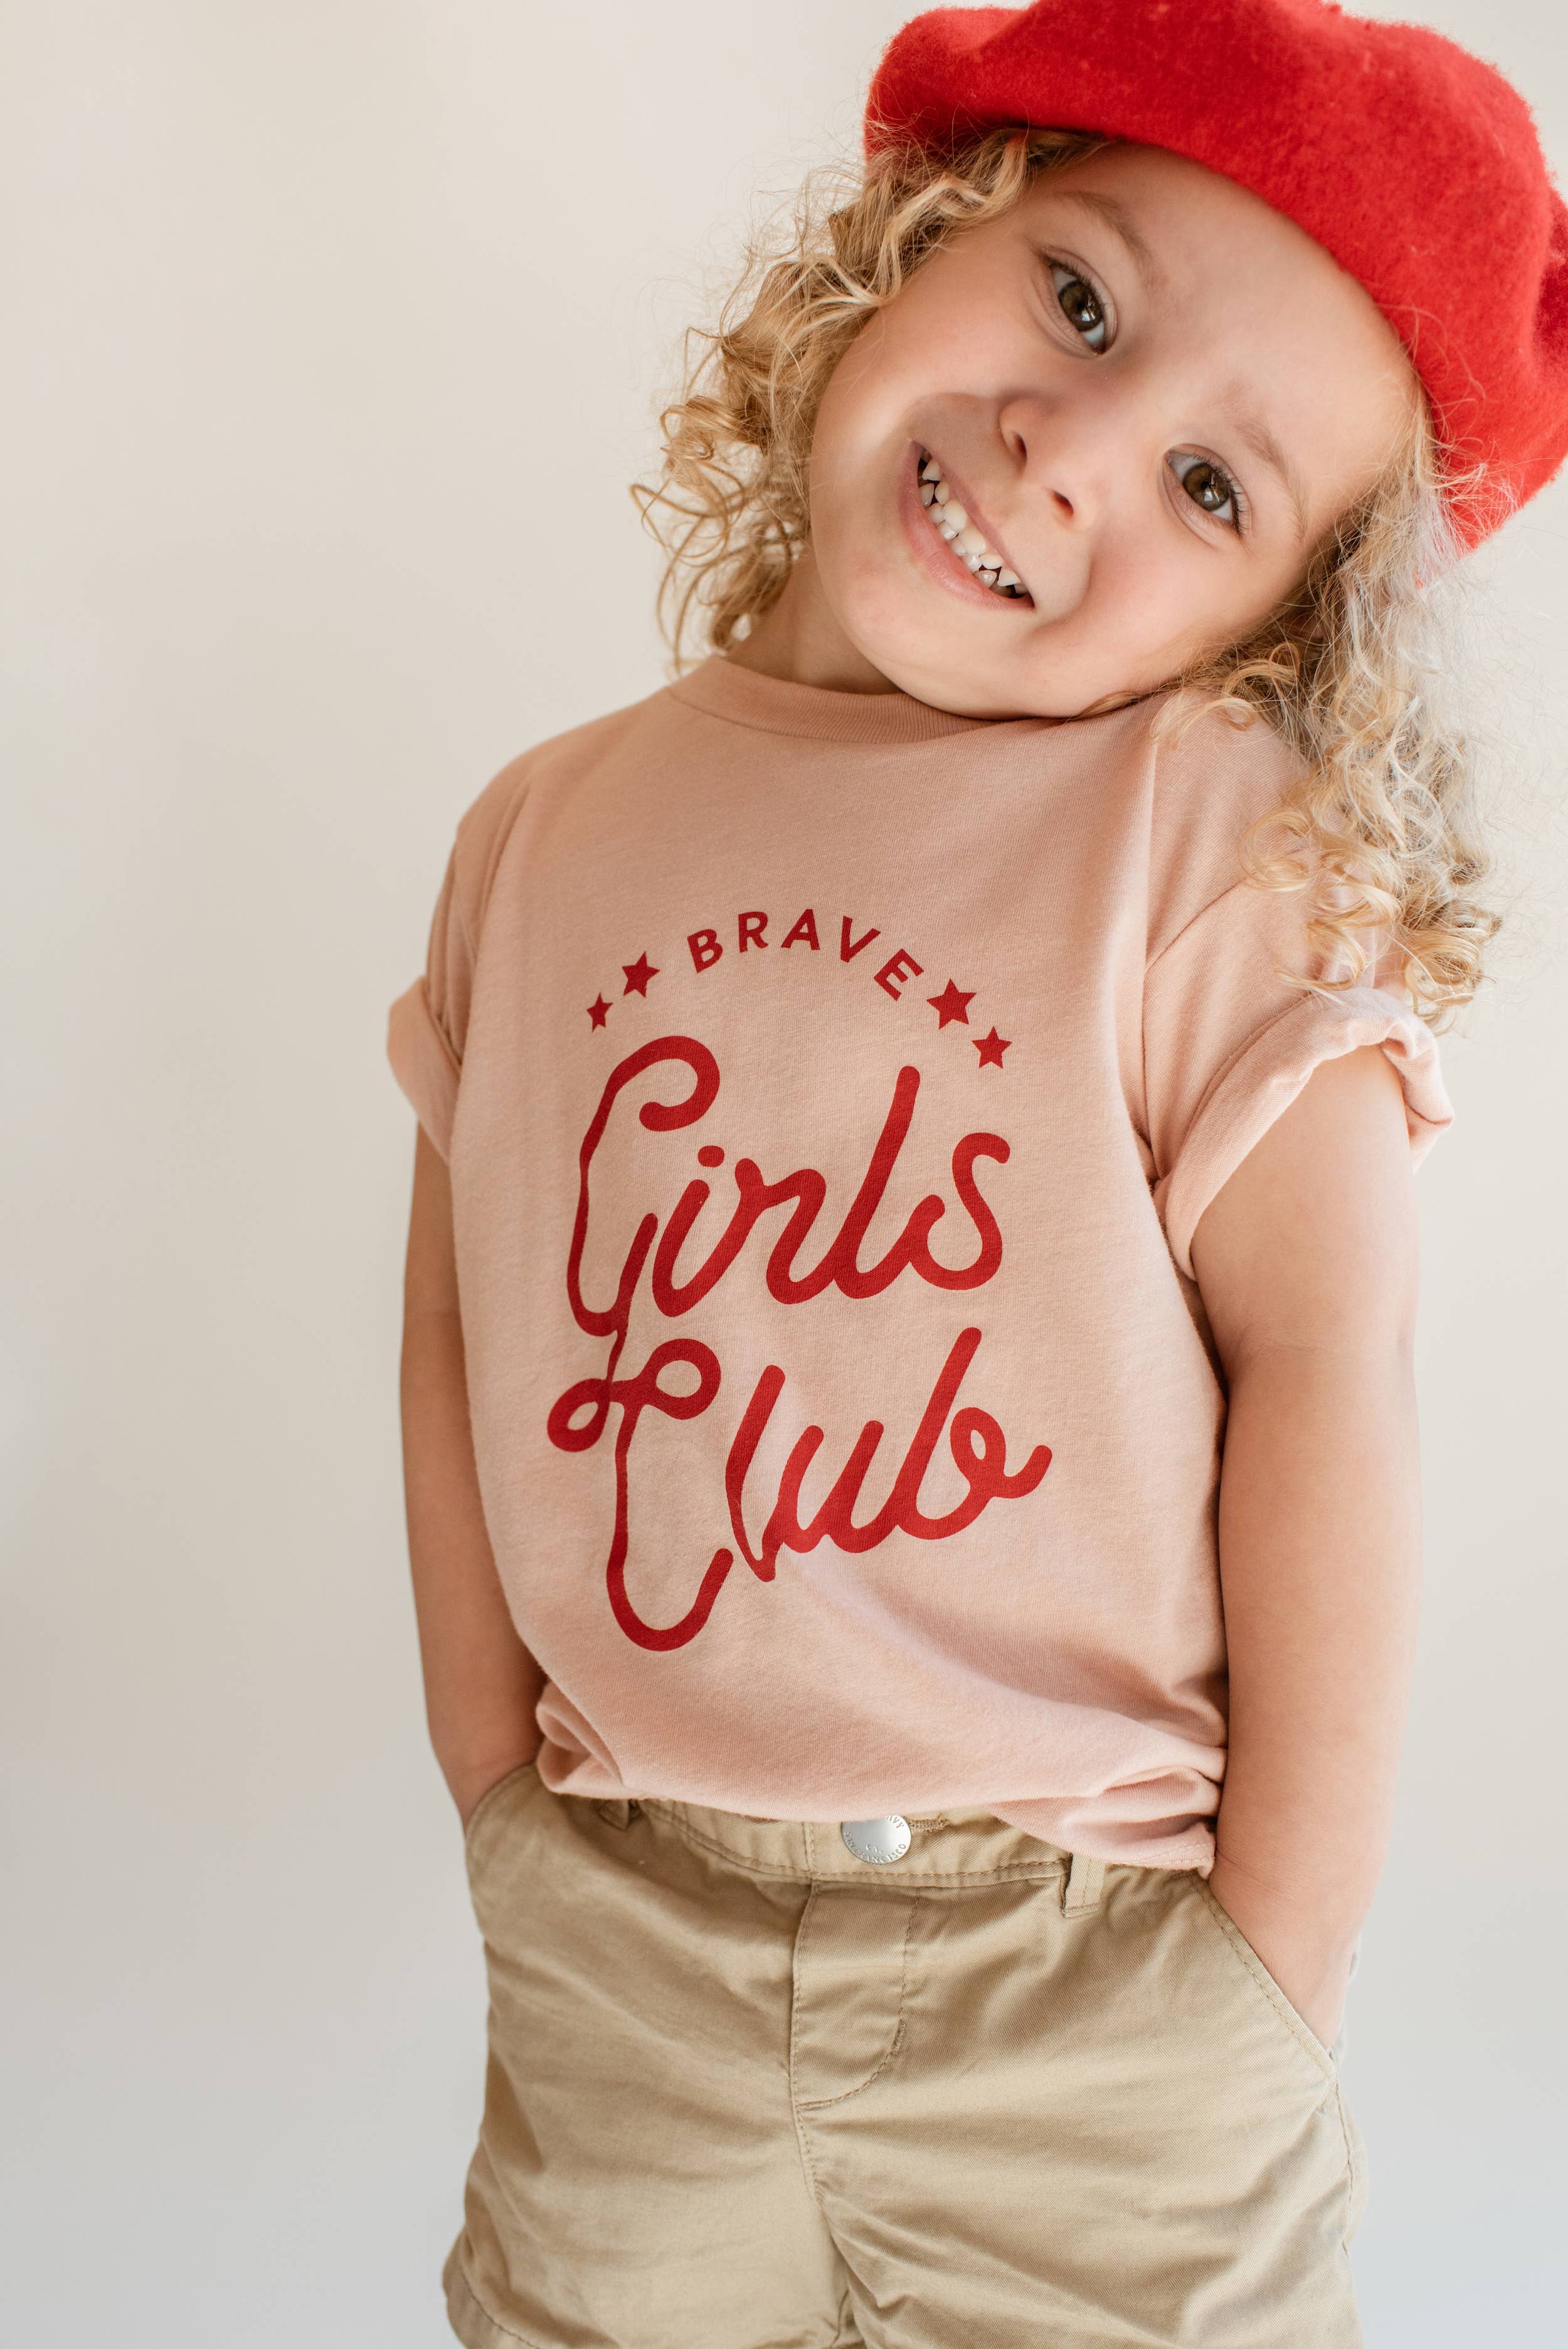 Brave Girls Club, Graphic Tees for Kids, Toddler Shirts